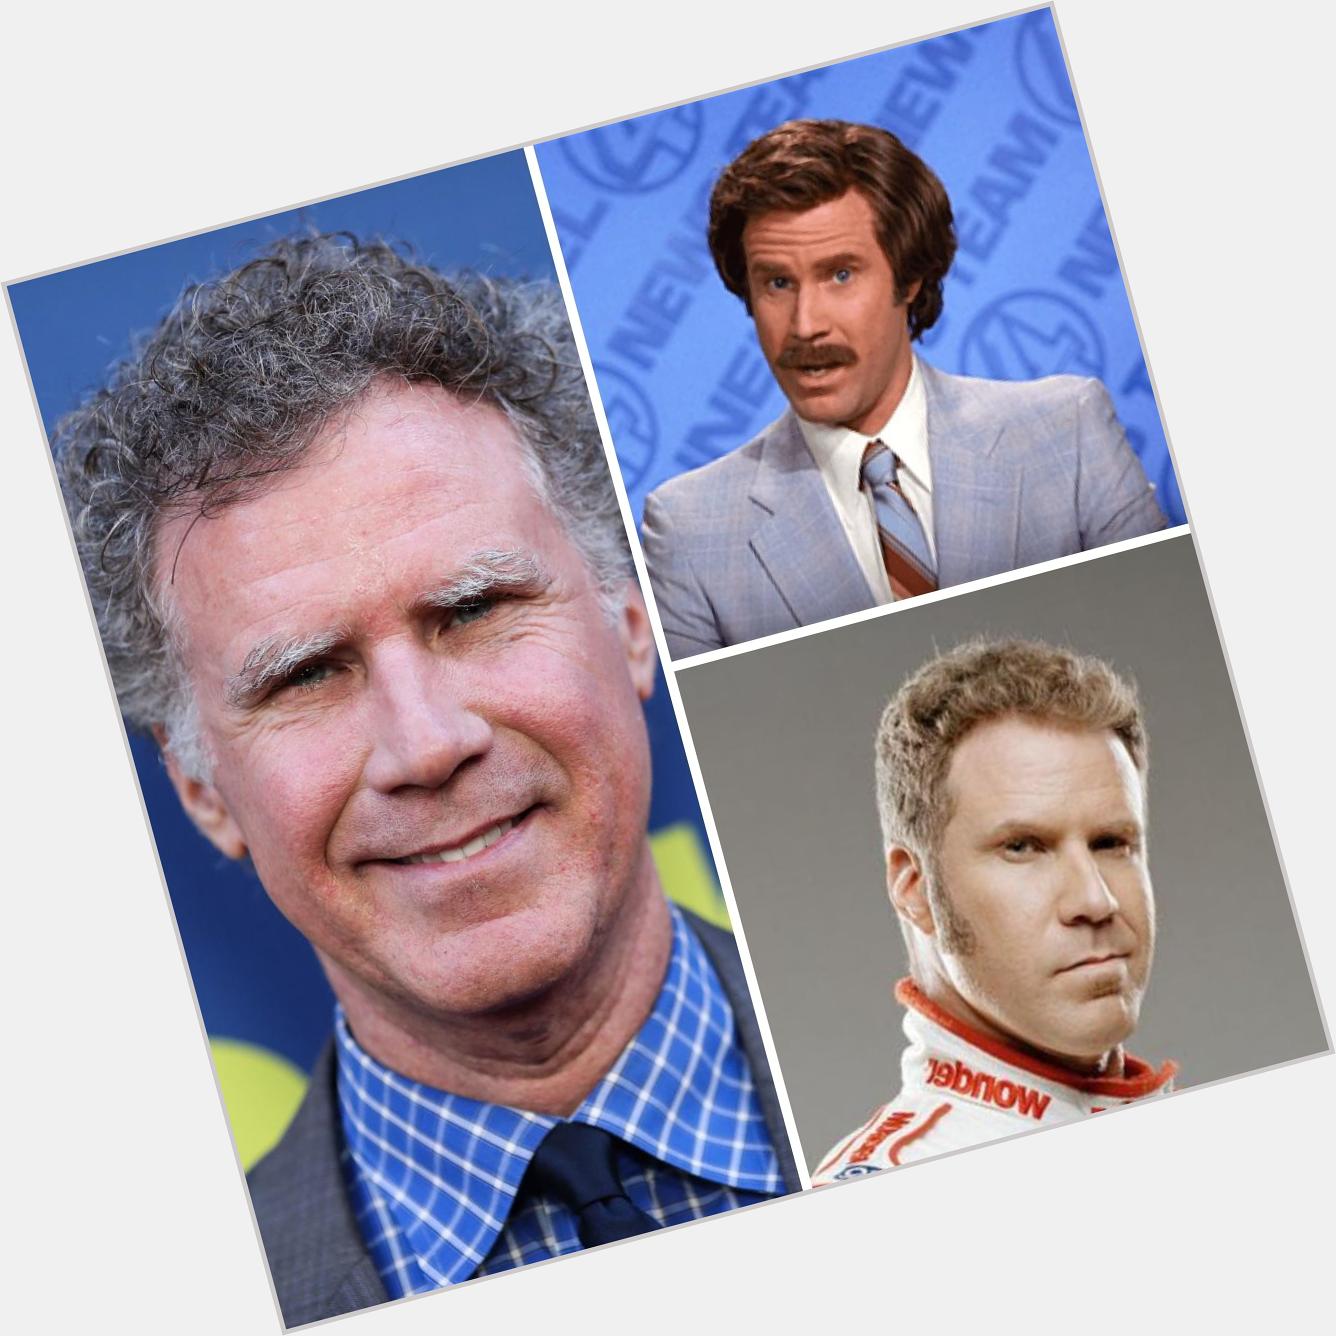 Happy Birthday to Will Ferrell who turns 52 today!  What is his funniest role to date? 